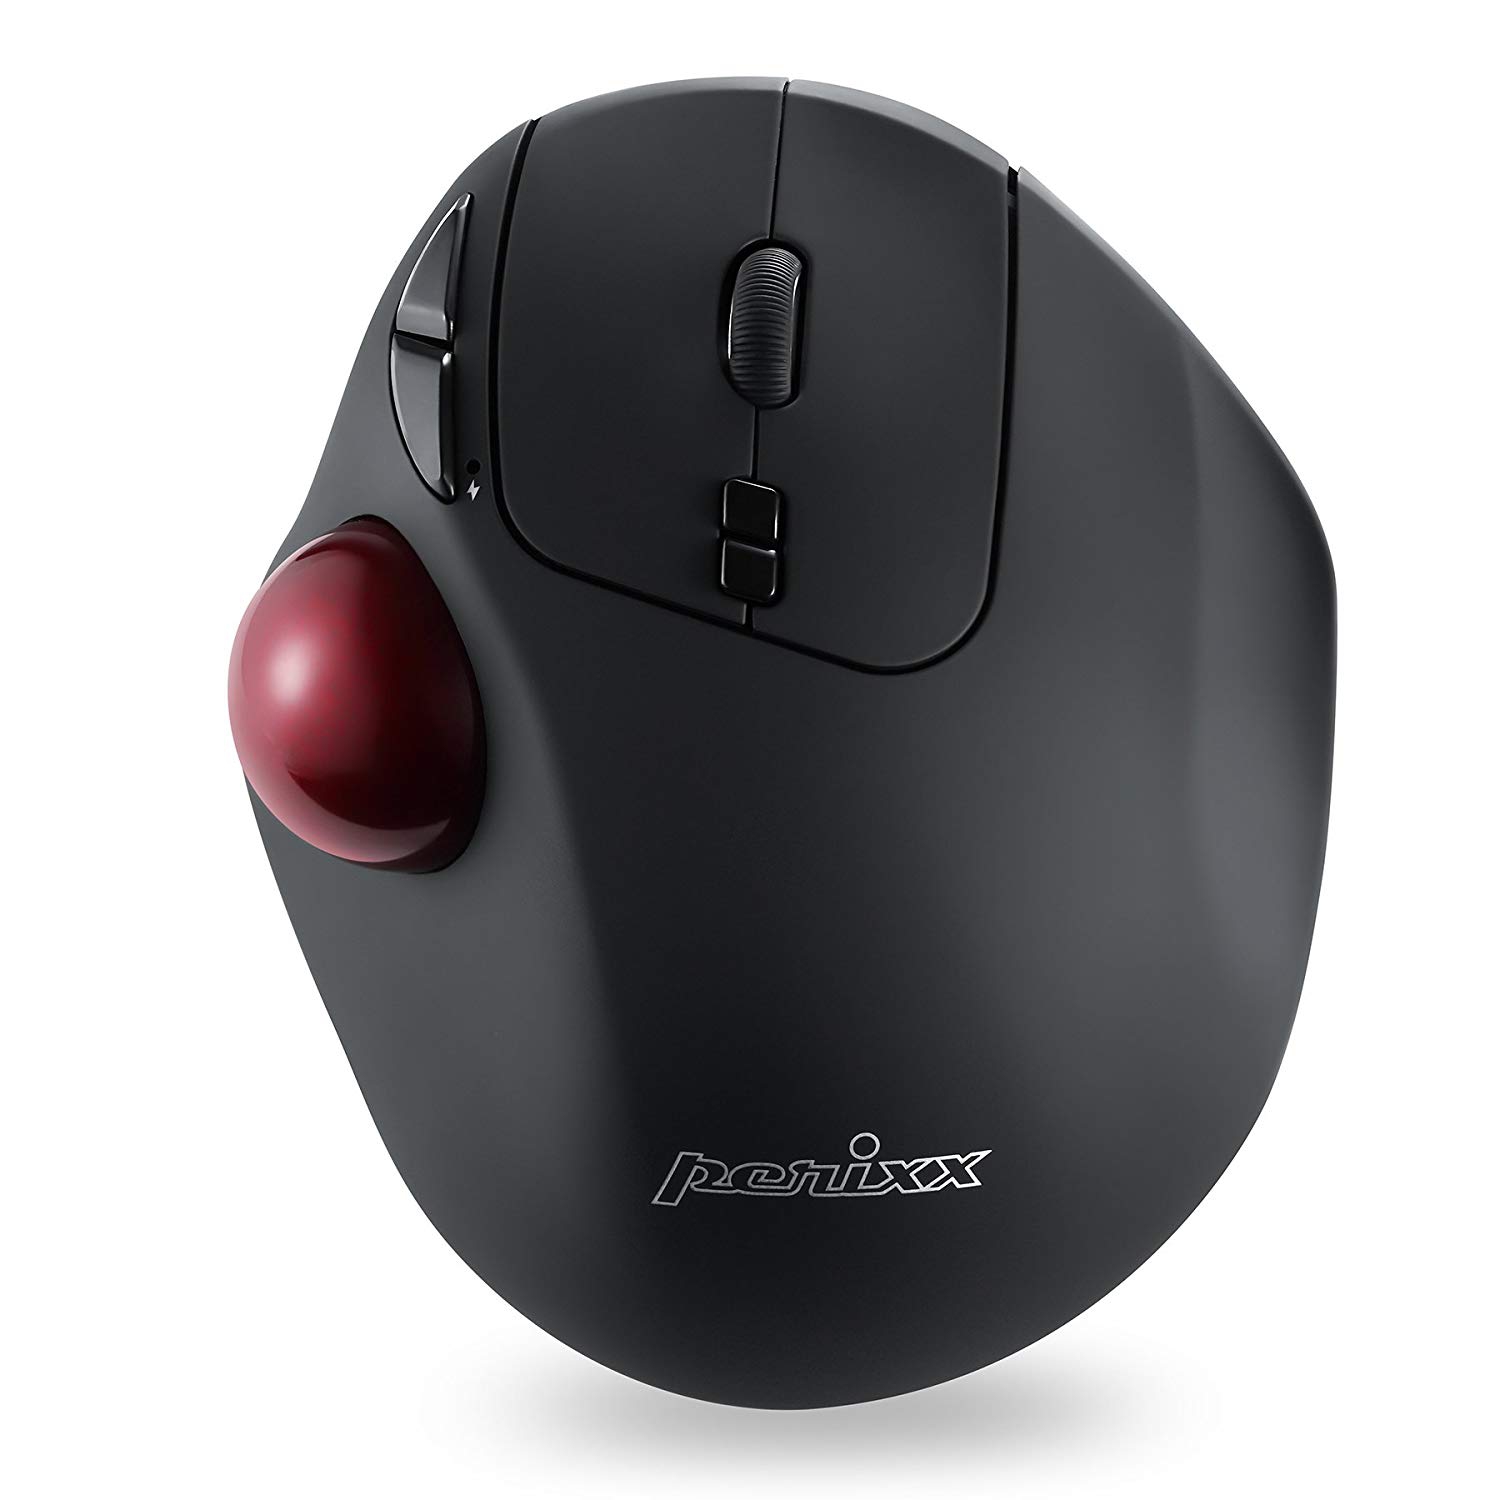 Wireless Programmable Trackball Mouse - 7 Button Design with 5 Programmable Buttons - DPI 400/1000